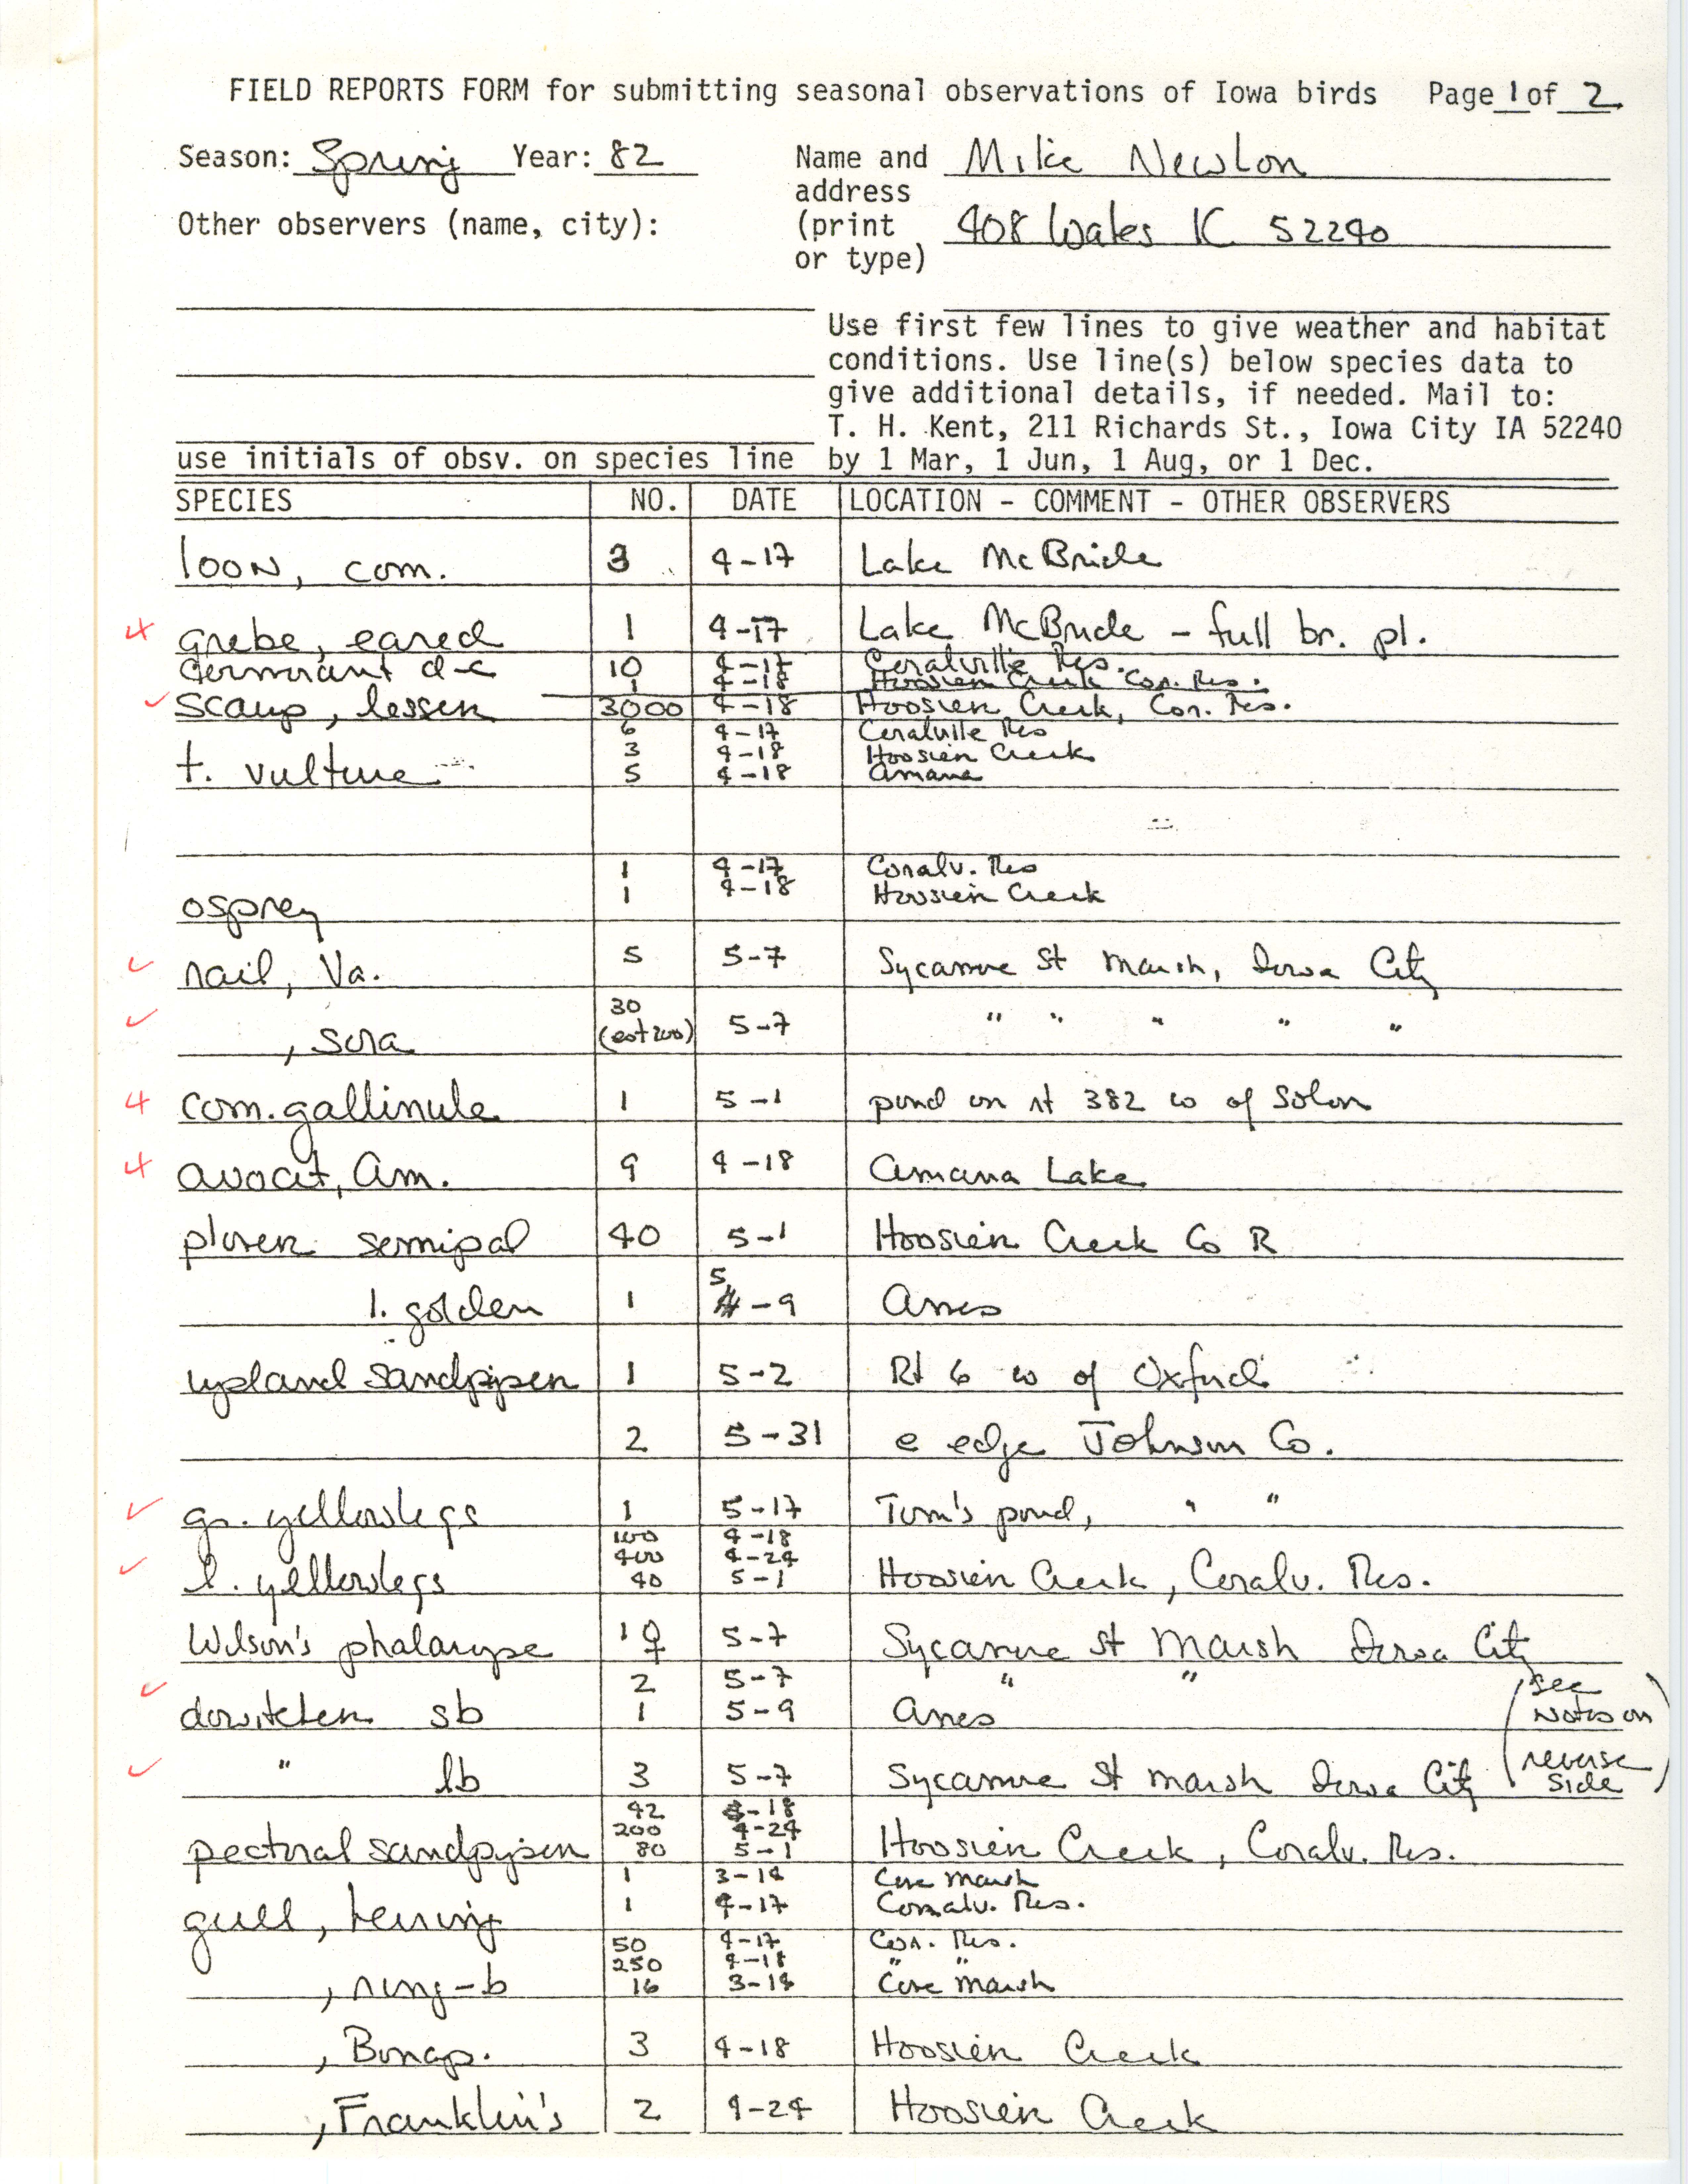 Field notes contributed by Michael C. Newlon, spring 1982